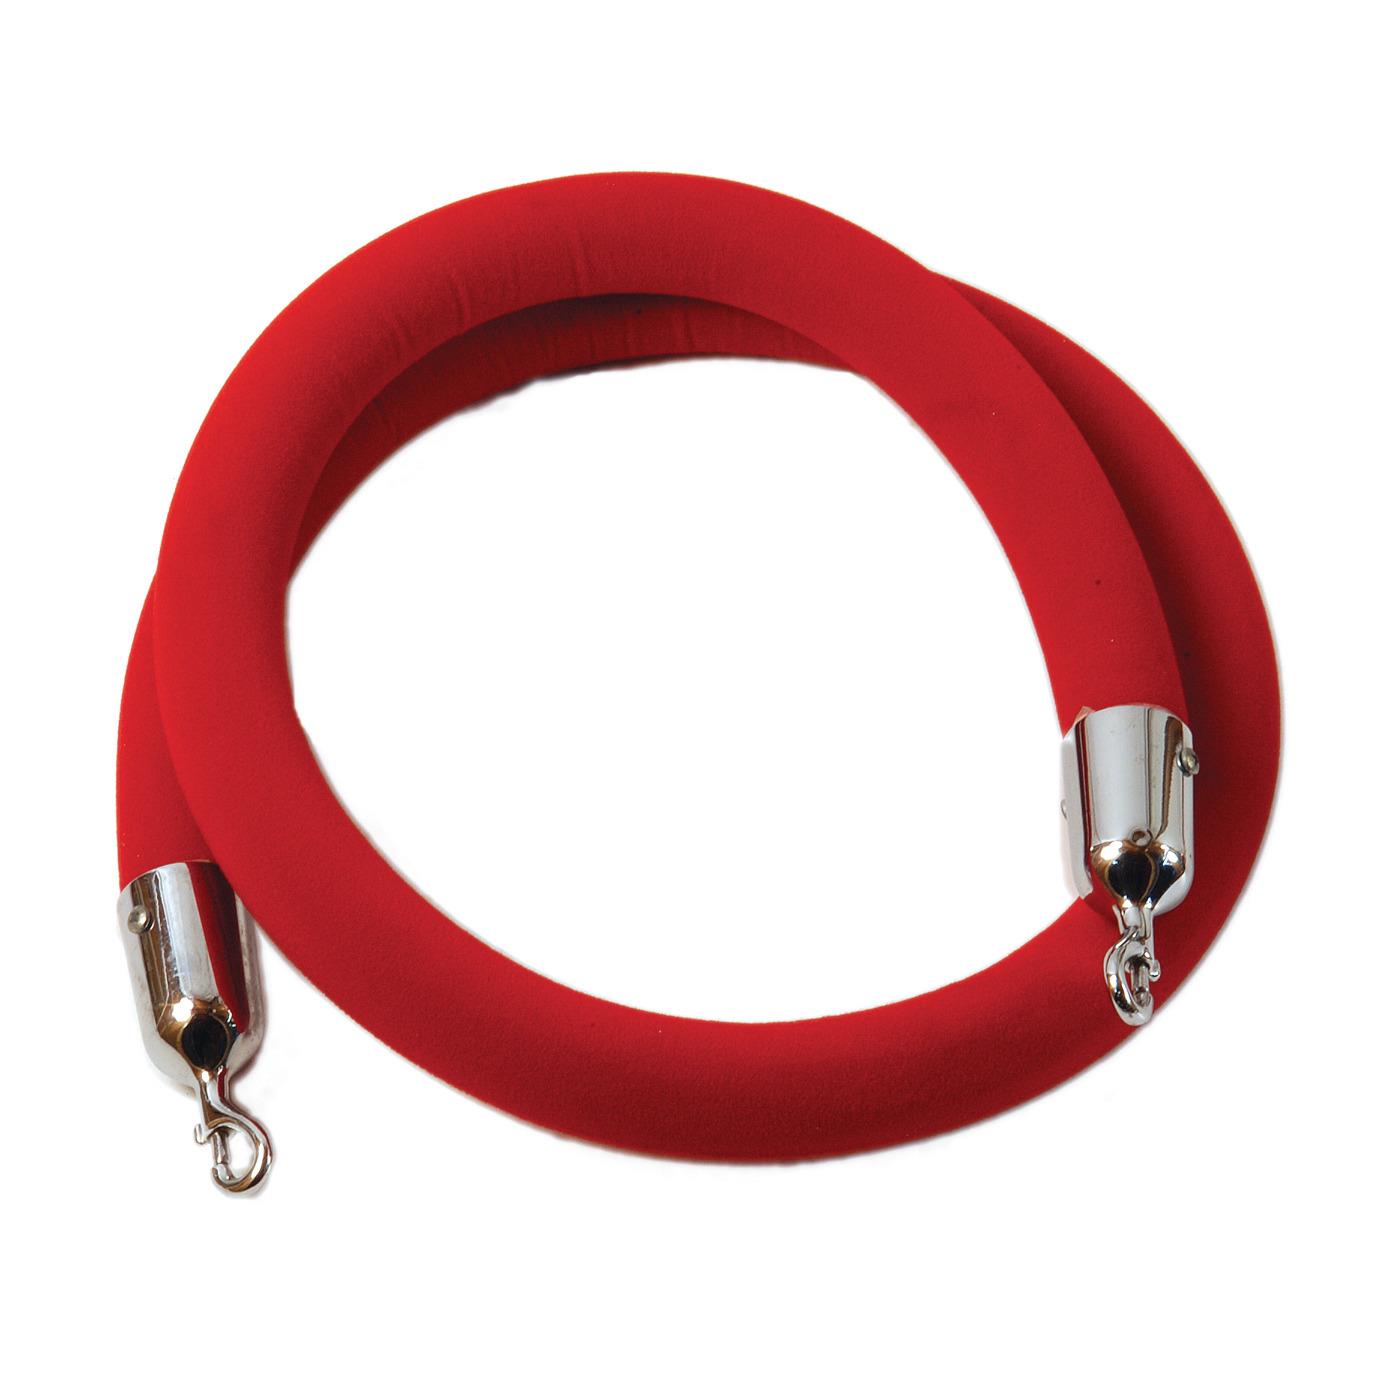 8' Rope - Red